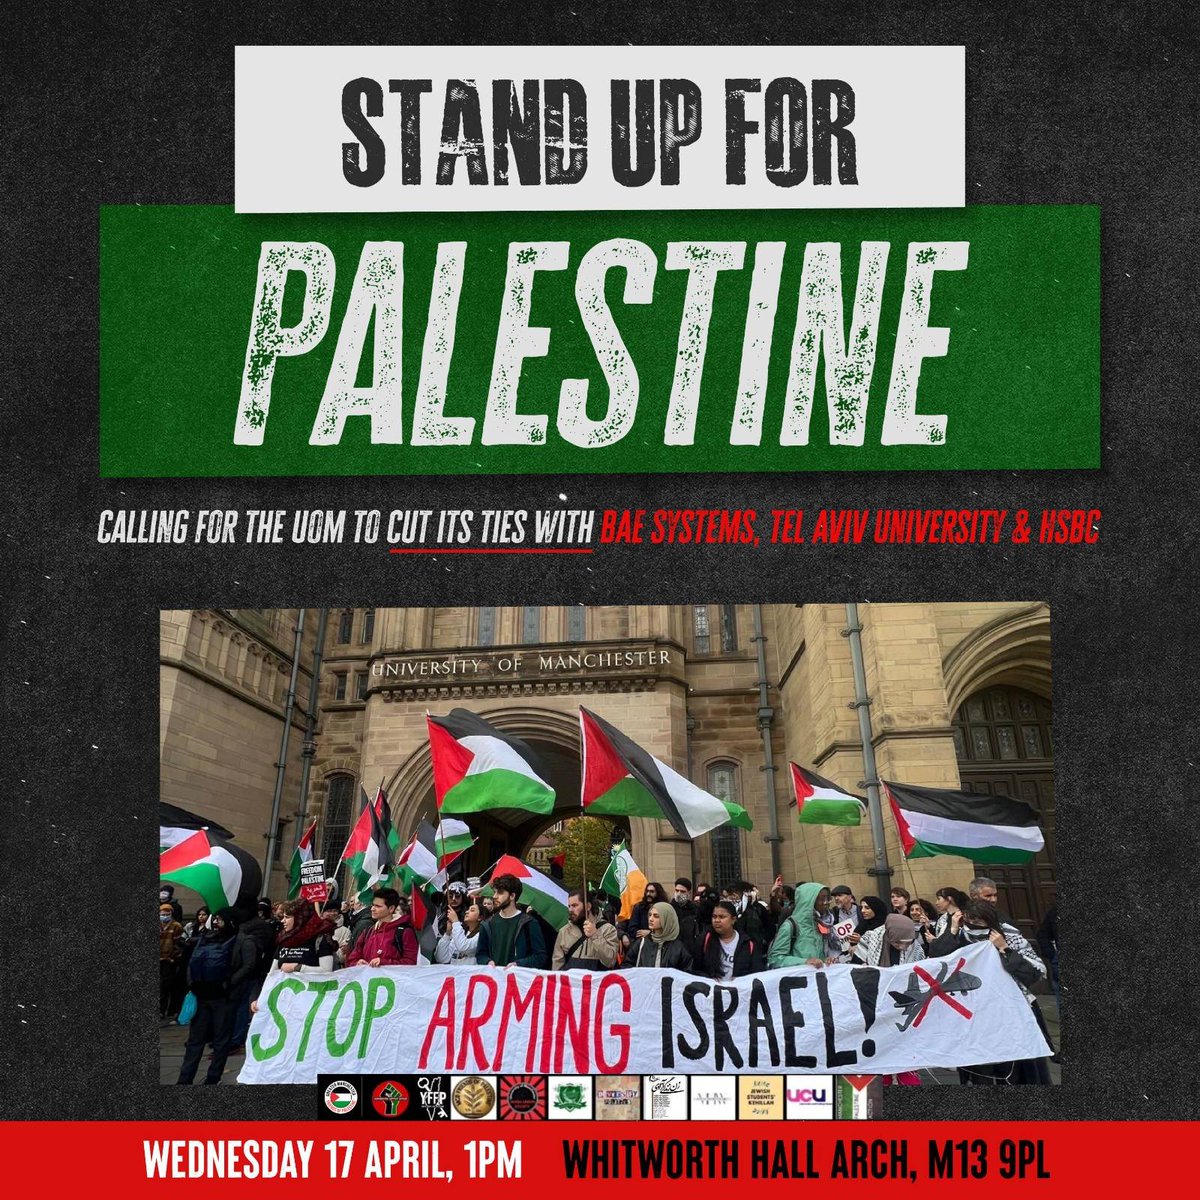 Stand up for Palestine demo next week! Weds 17 April, meet at Whitworth Hall Arch. Our demands: UoM to cut ties with BAE systens, Tel Aviv University & HSBC!